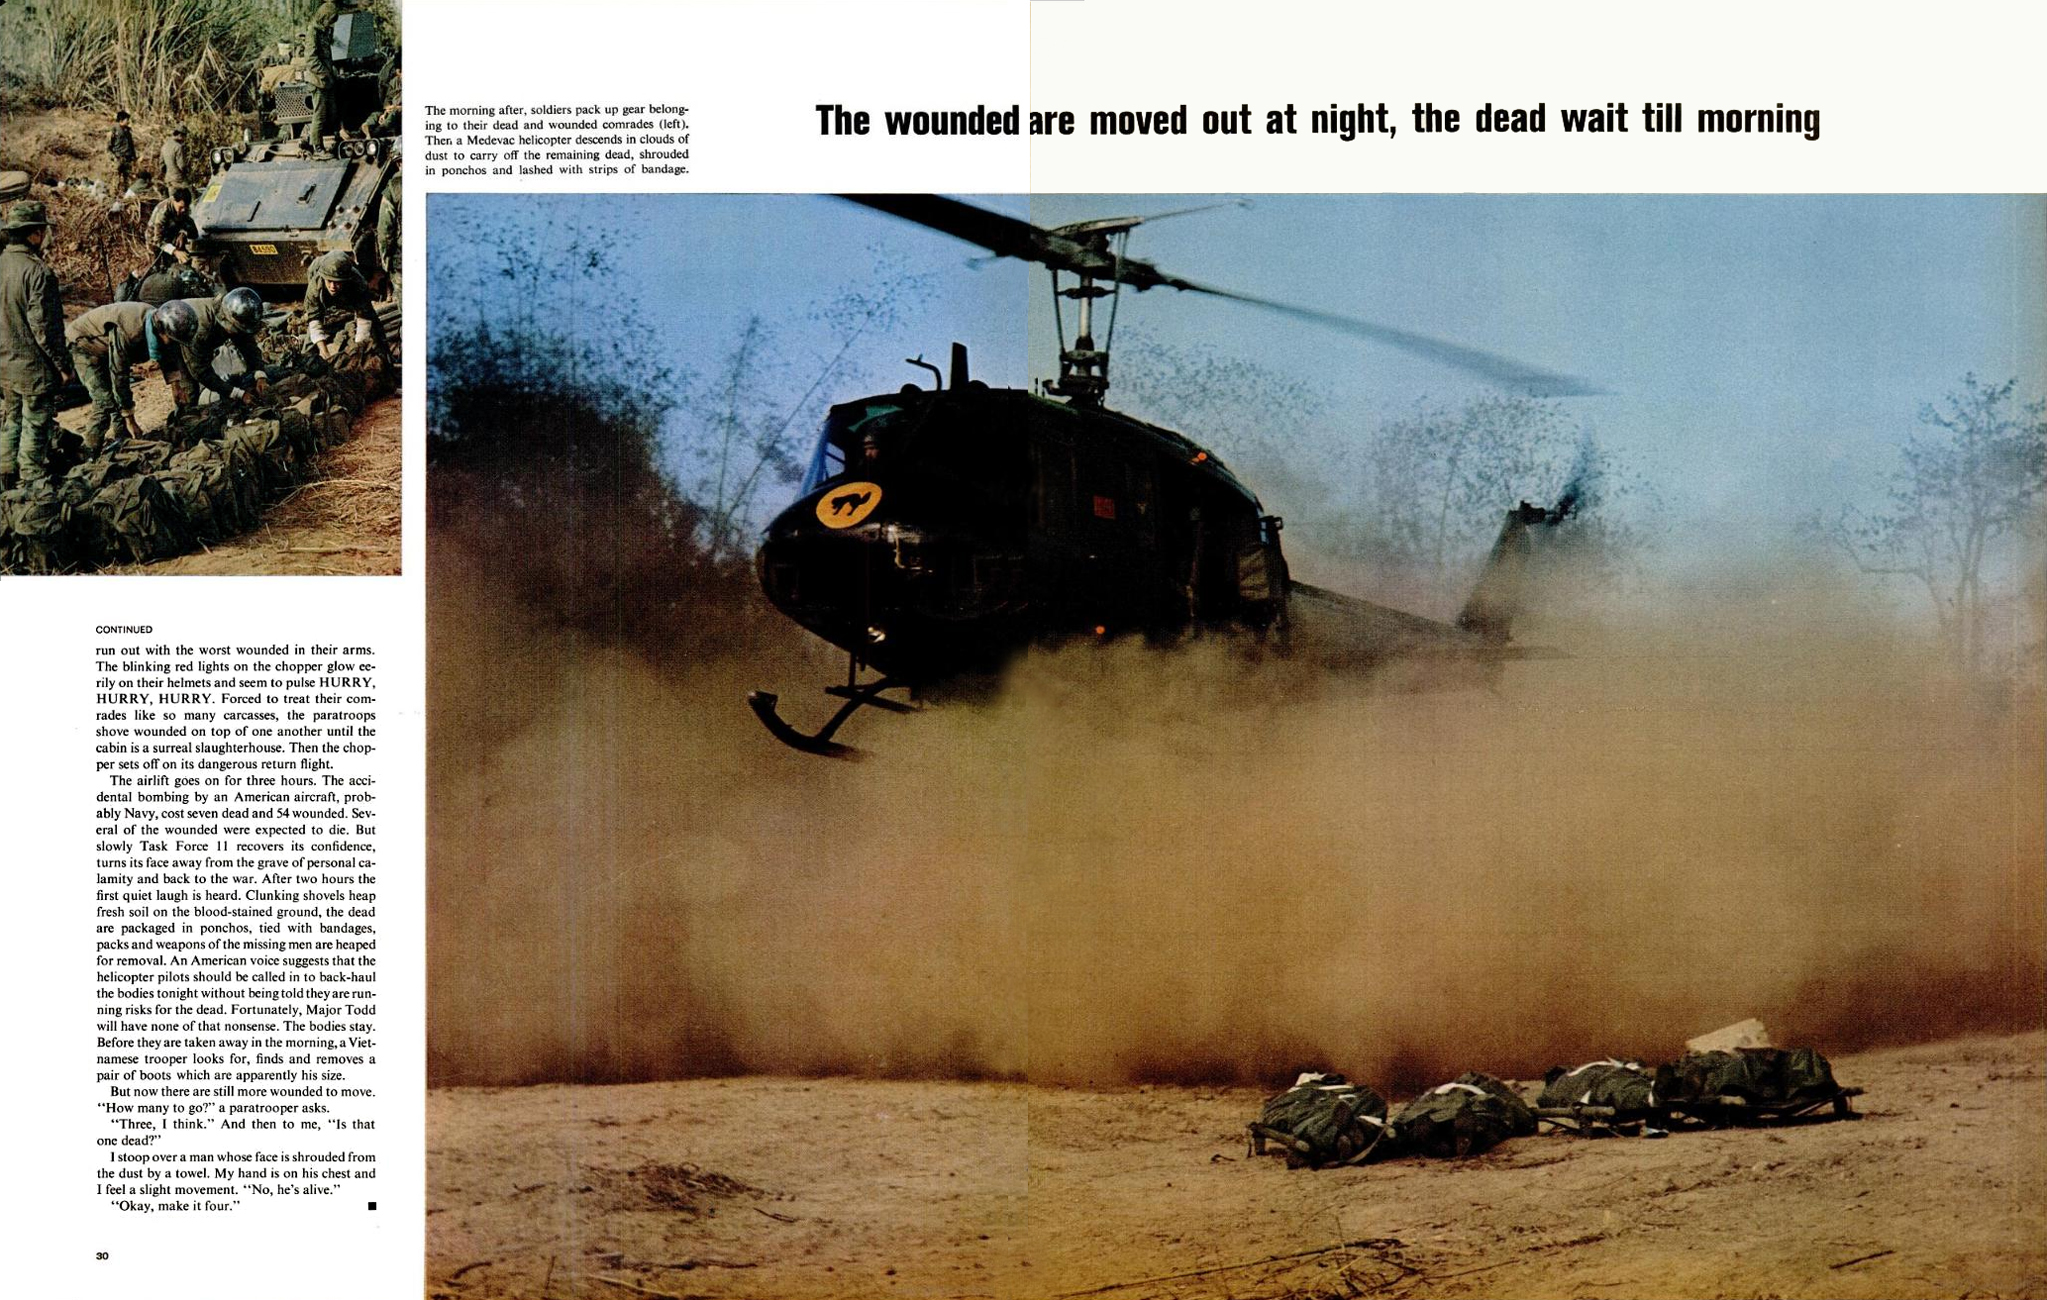 LIFE magazine Feb. 19, 1971 - Larry Burrow's hunting image is published for the first time